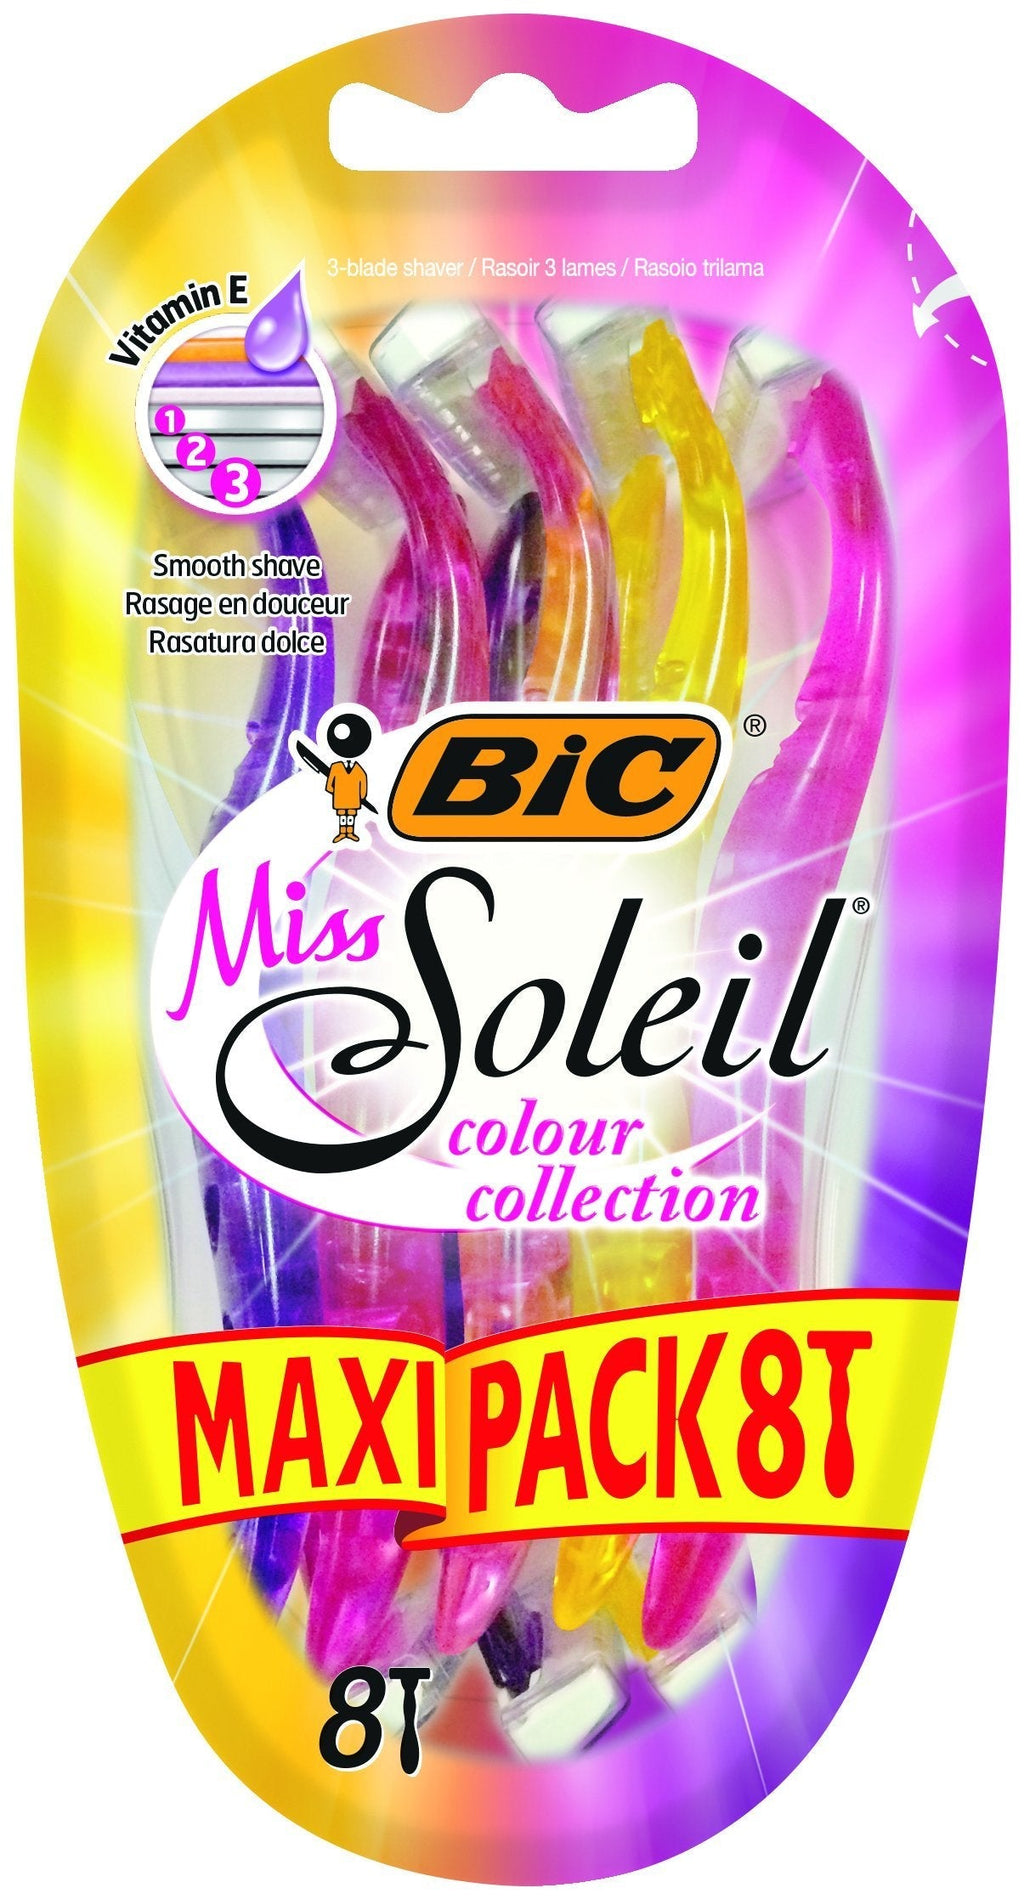 [Australia] - BIC Miss Soleil Colour Collection, Triple Blade Razor for Women, Great Grip and Control, With Flower Designed Handles, Pack of 8 8 Count (Pack of 1) 